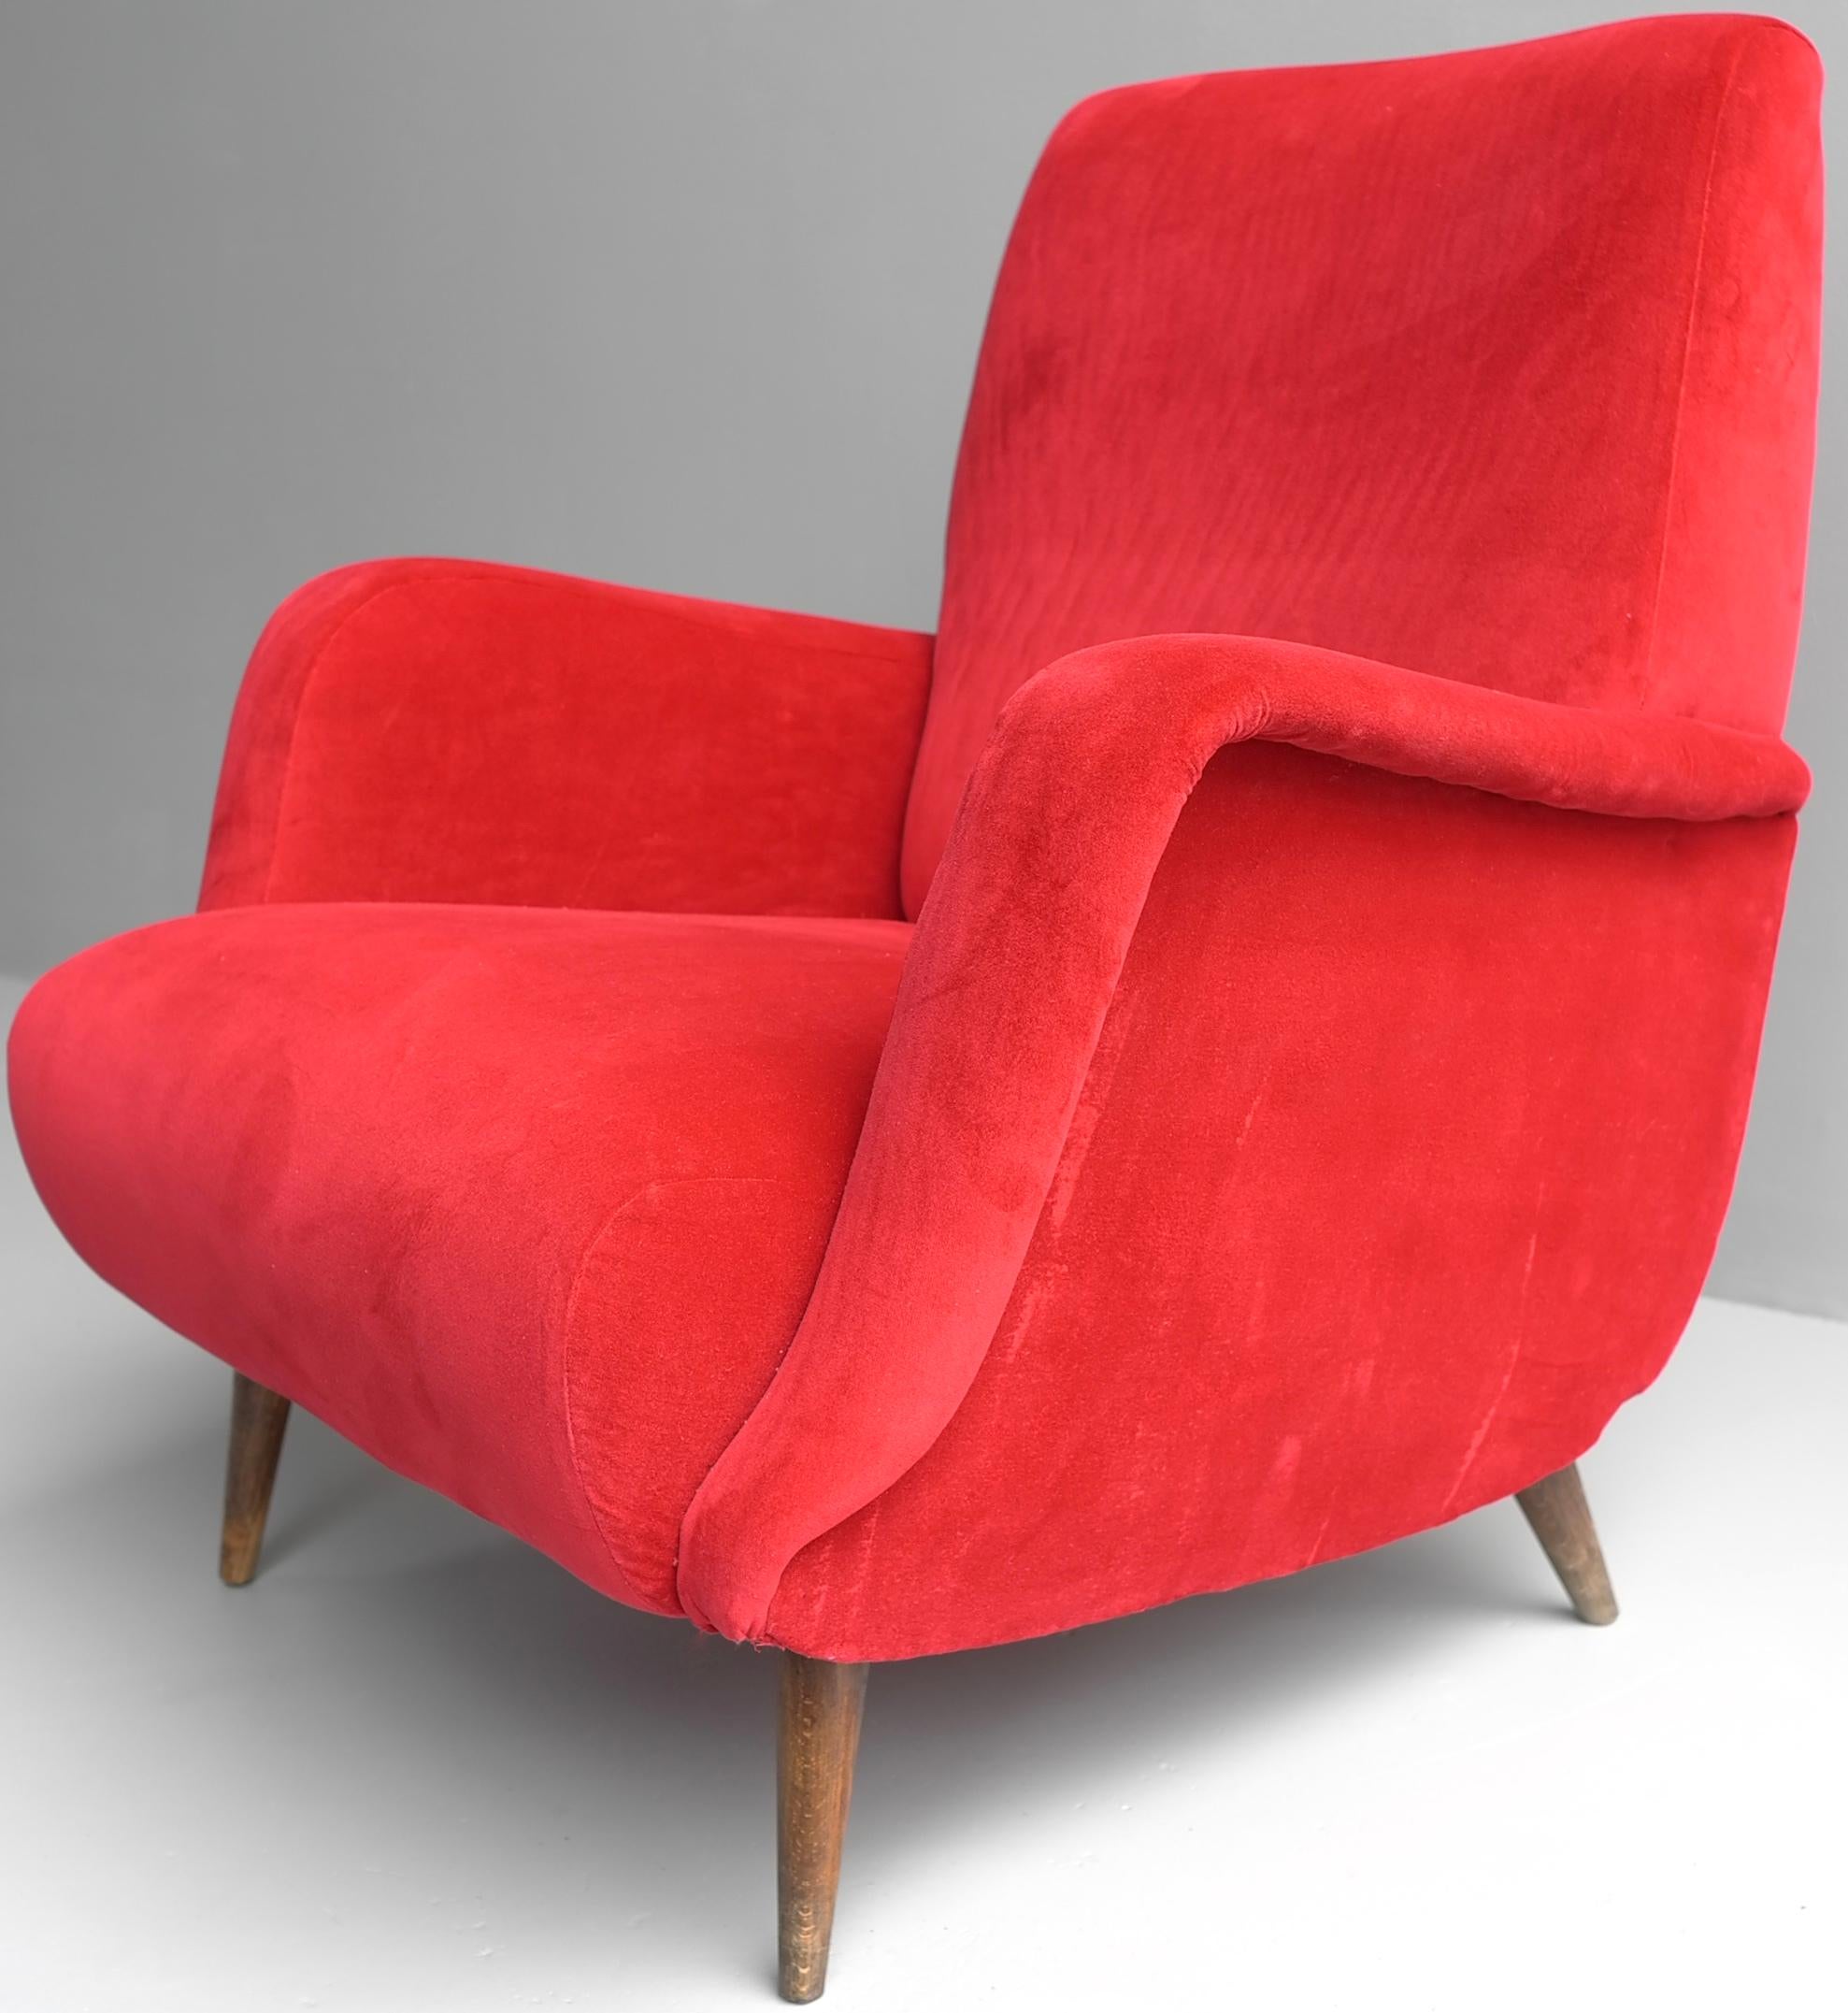 Mid-Century Modern Carlo de Carli Red velvet and Walnut Armchair Model 806 by Cassina, Italy, 1955 For Sale